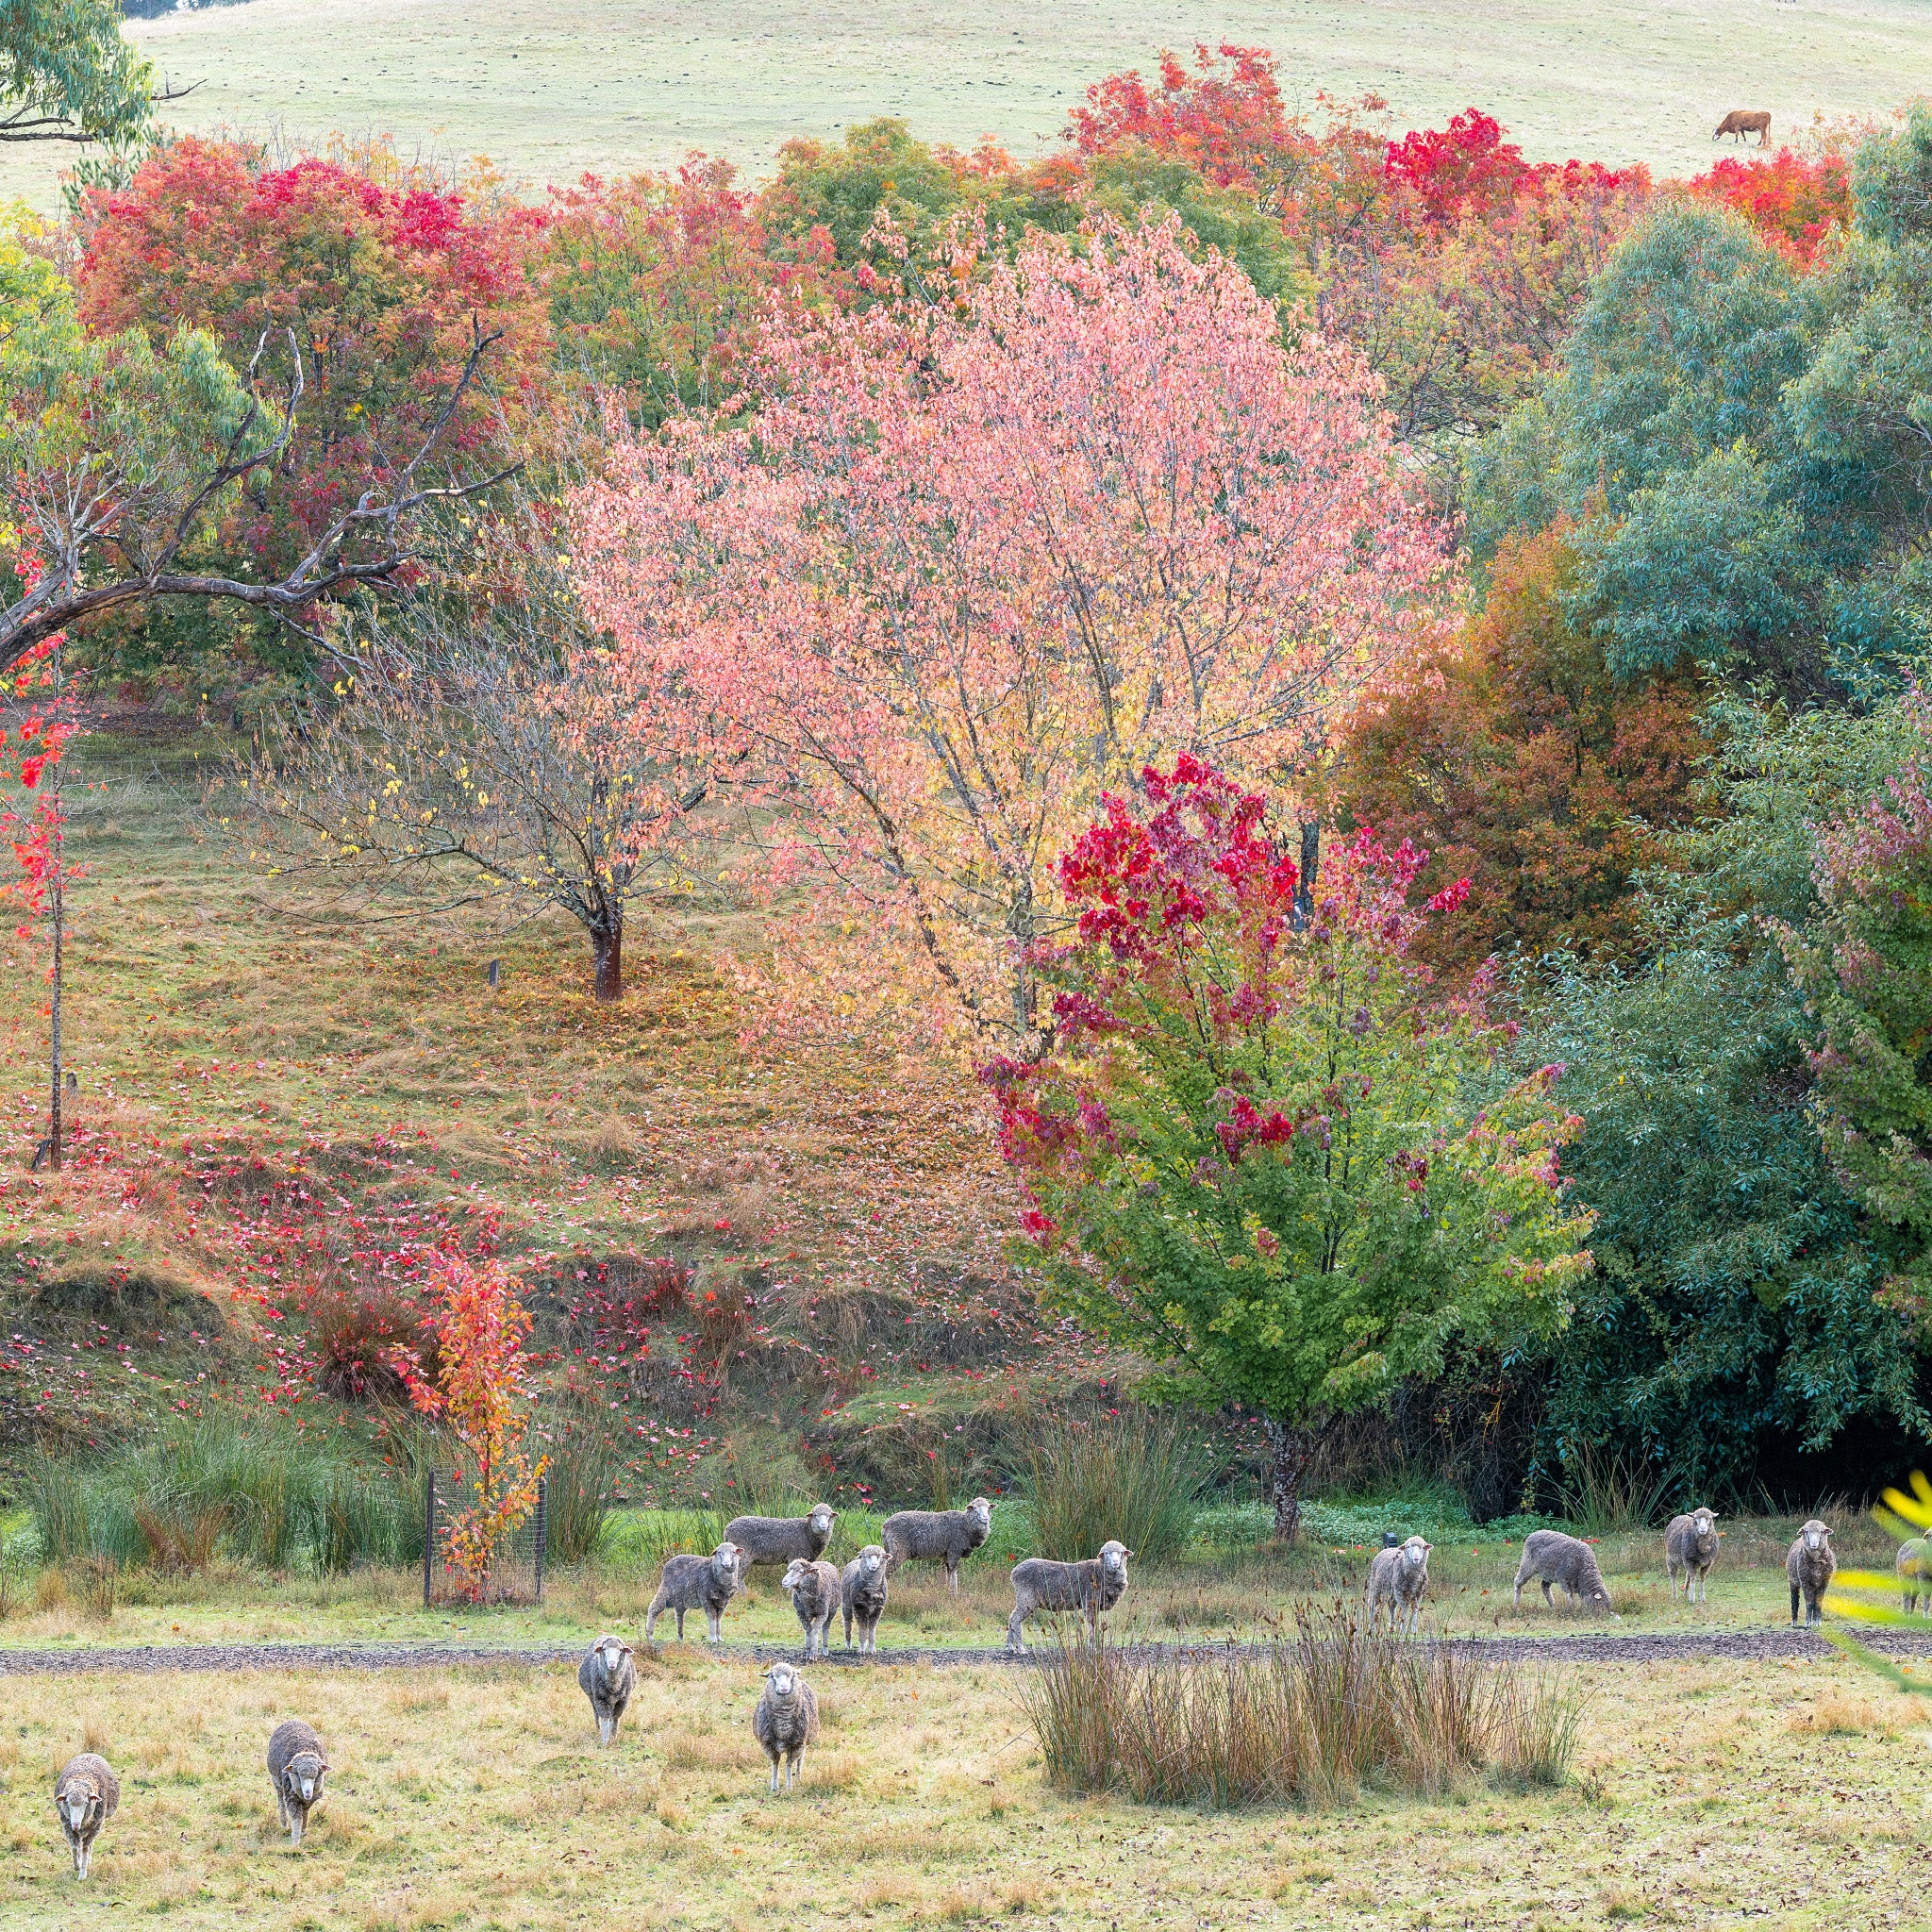 sheep in a field at the golden valley tree park